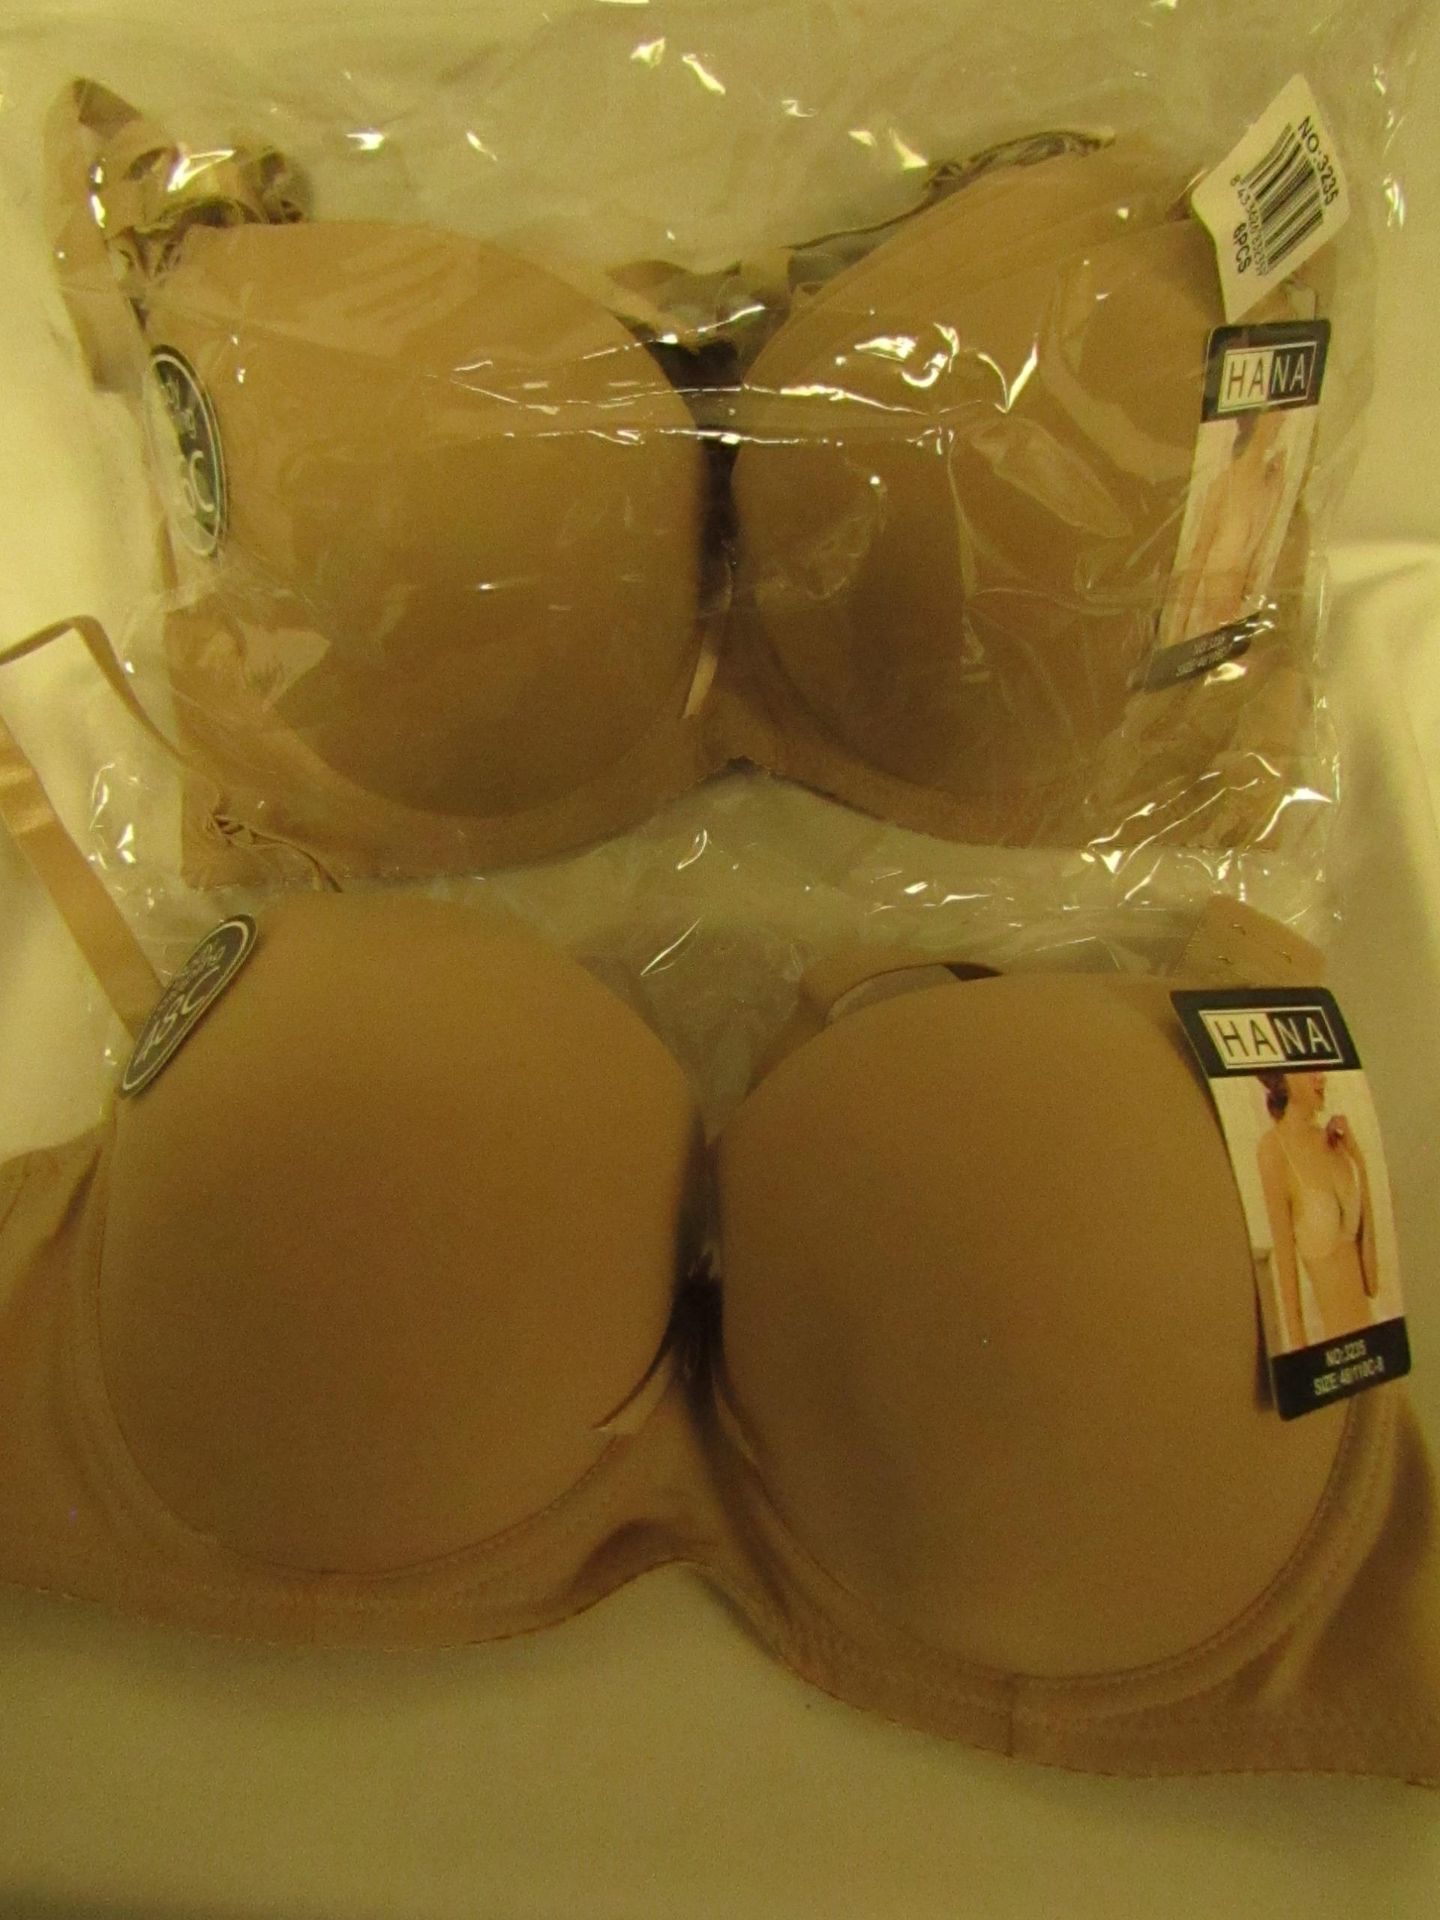 6 X Hana Padded Bra"s Sizes 38C to 48C Nude Colour New & Packaged